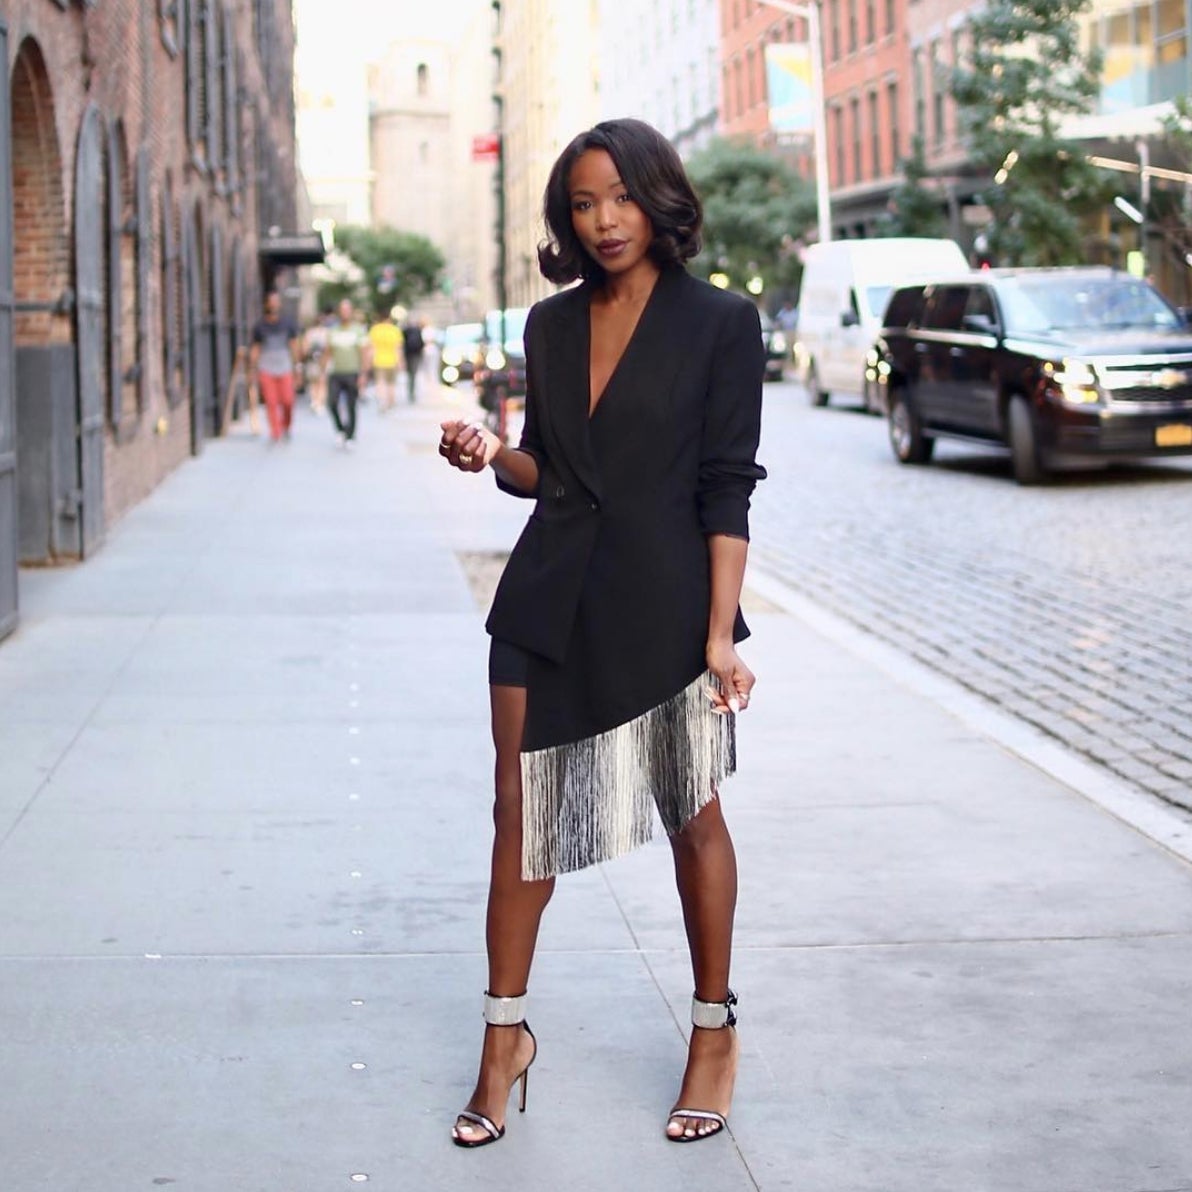 ESSENCE 25 Most Stylish: Kahlana Barfield Brown Is A Fabulous Young ...